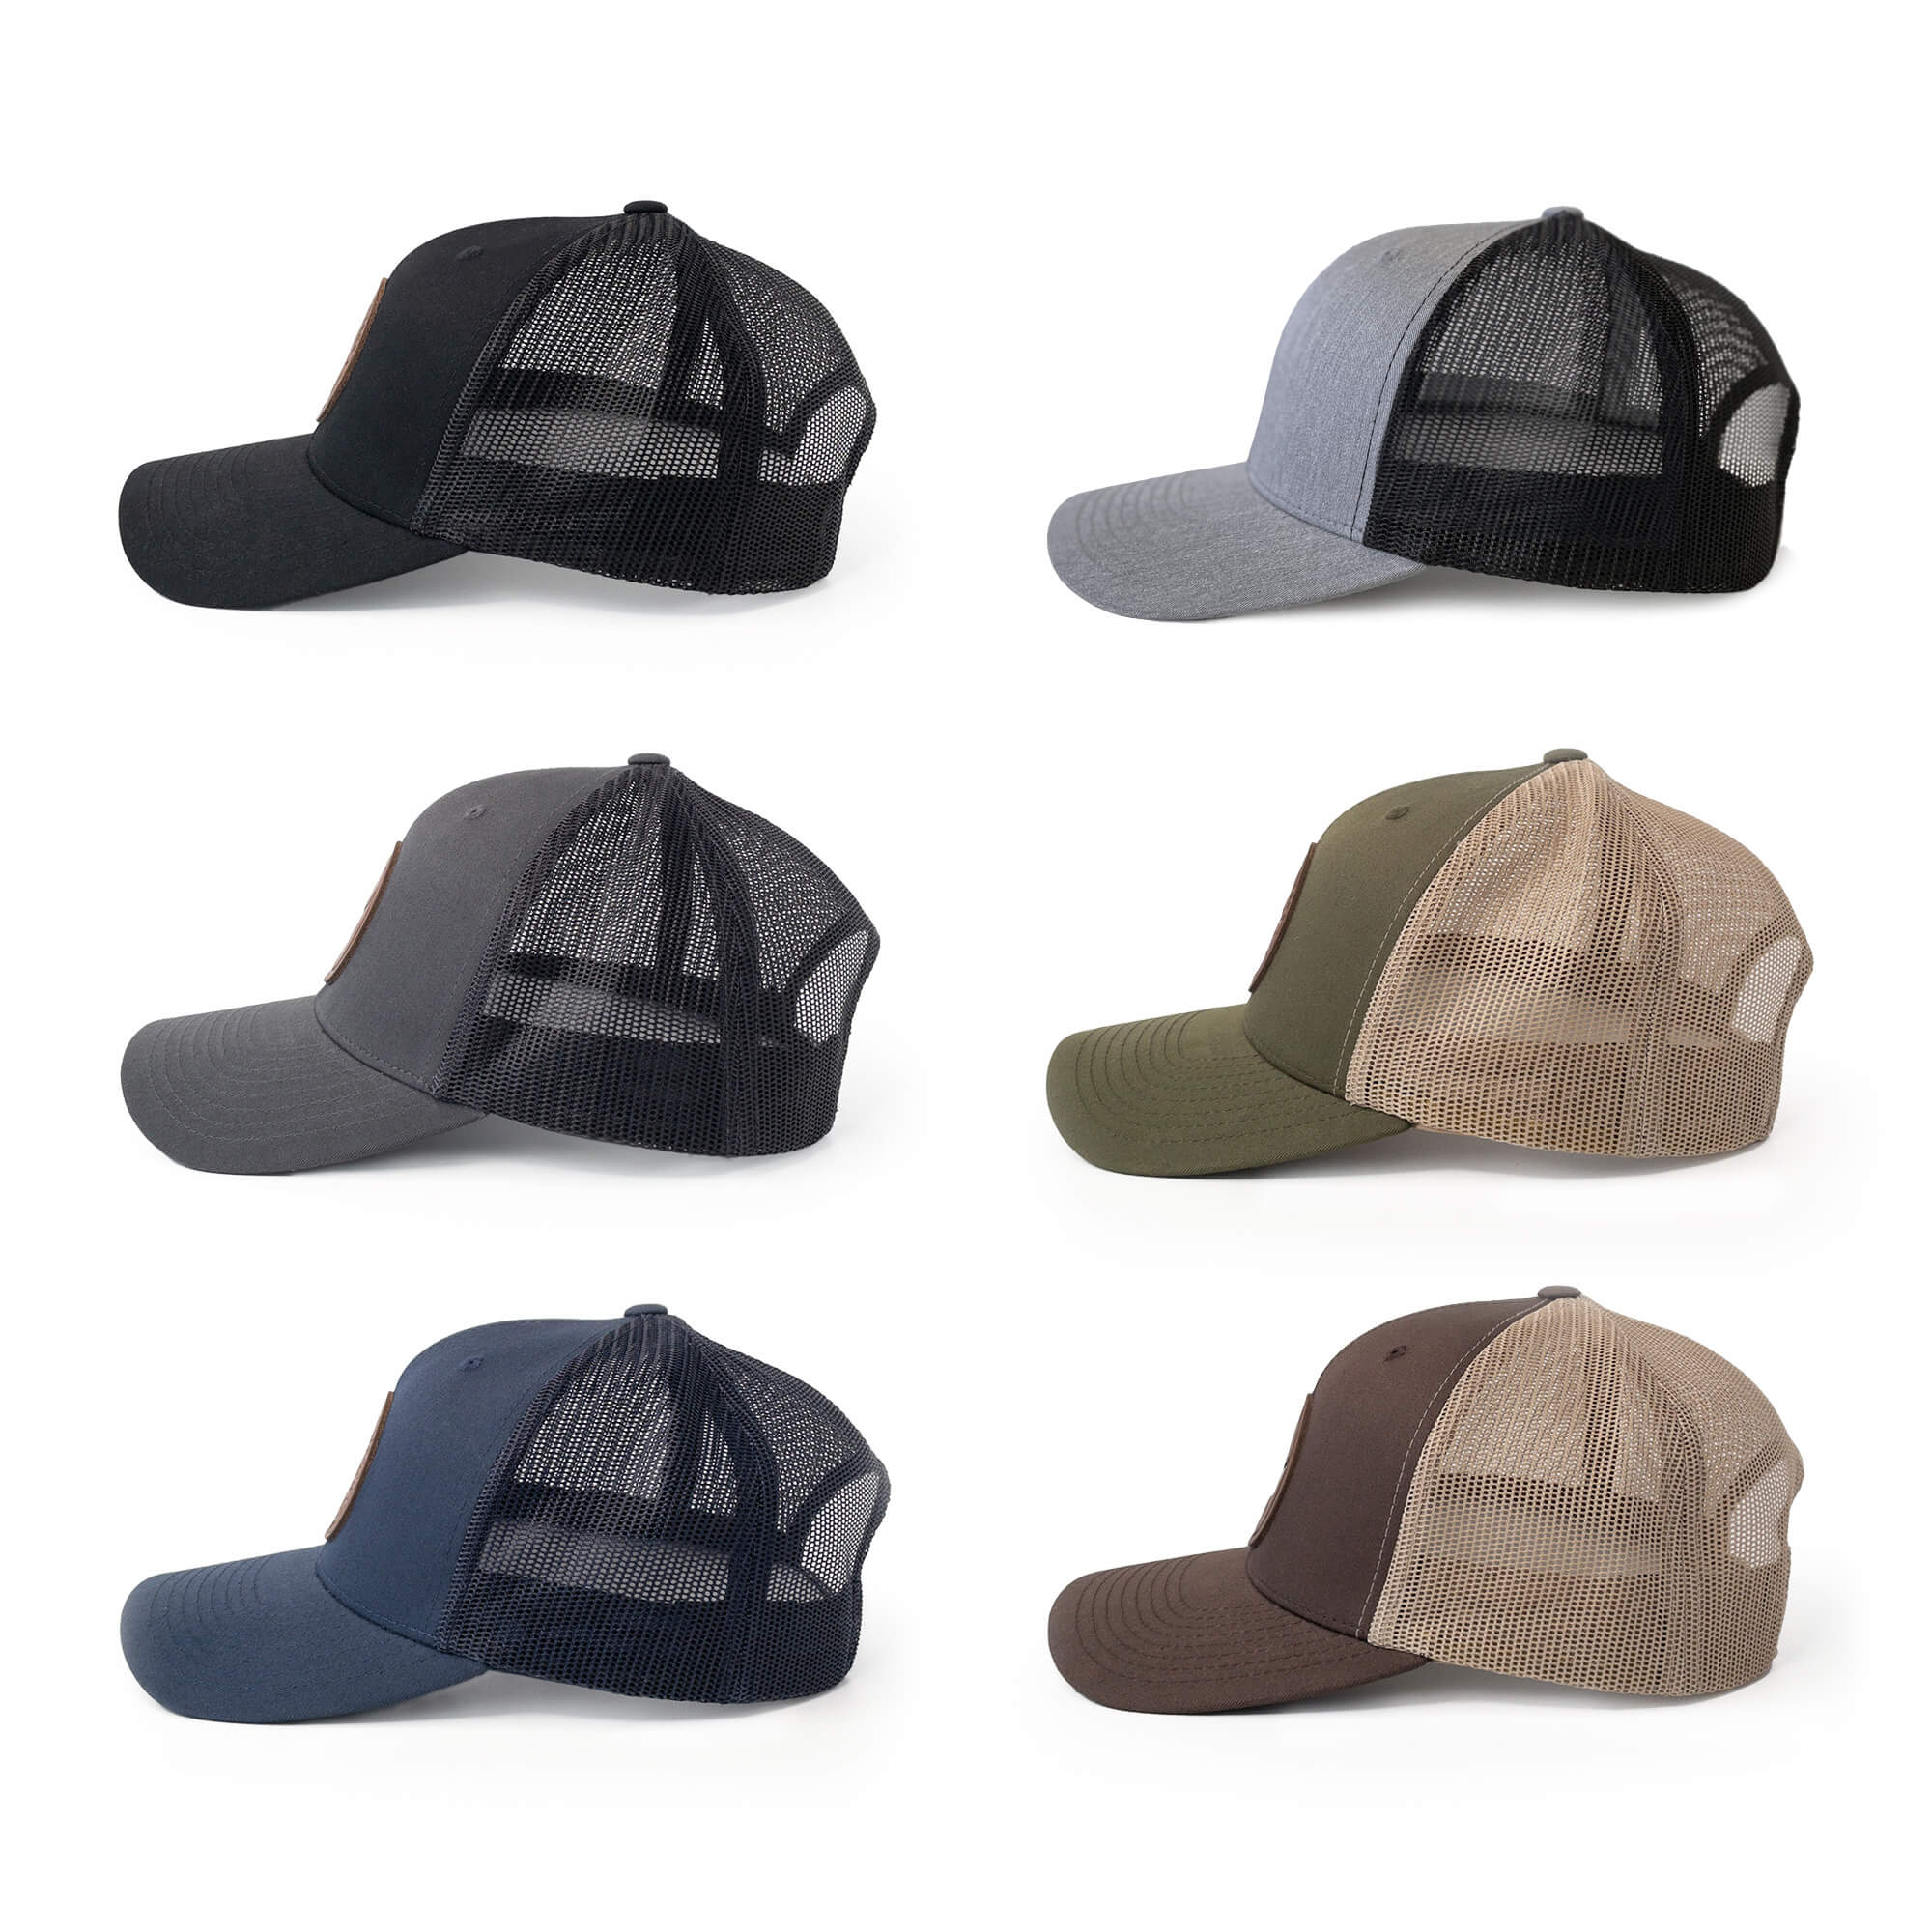 Leather patch trucker hats available in 6 colors | BLACK-005-003, CHARC-005-003, NAVY-005-003, HGREY-005-003, MOSS-005-003, BROWN-005-003